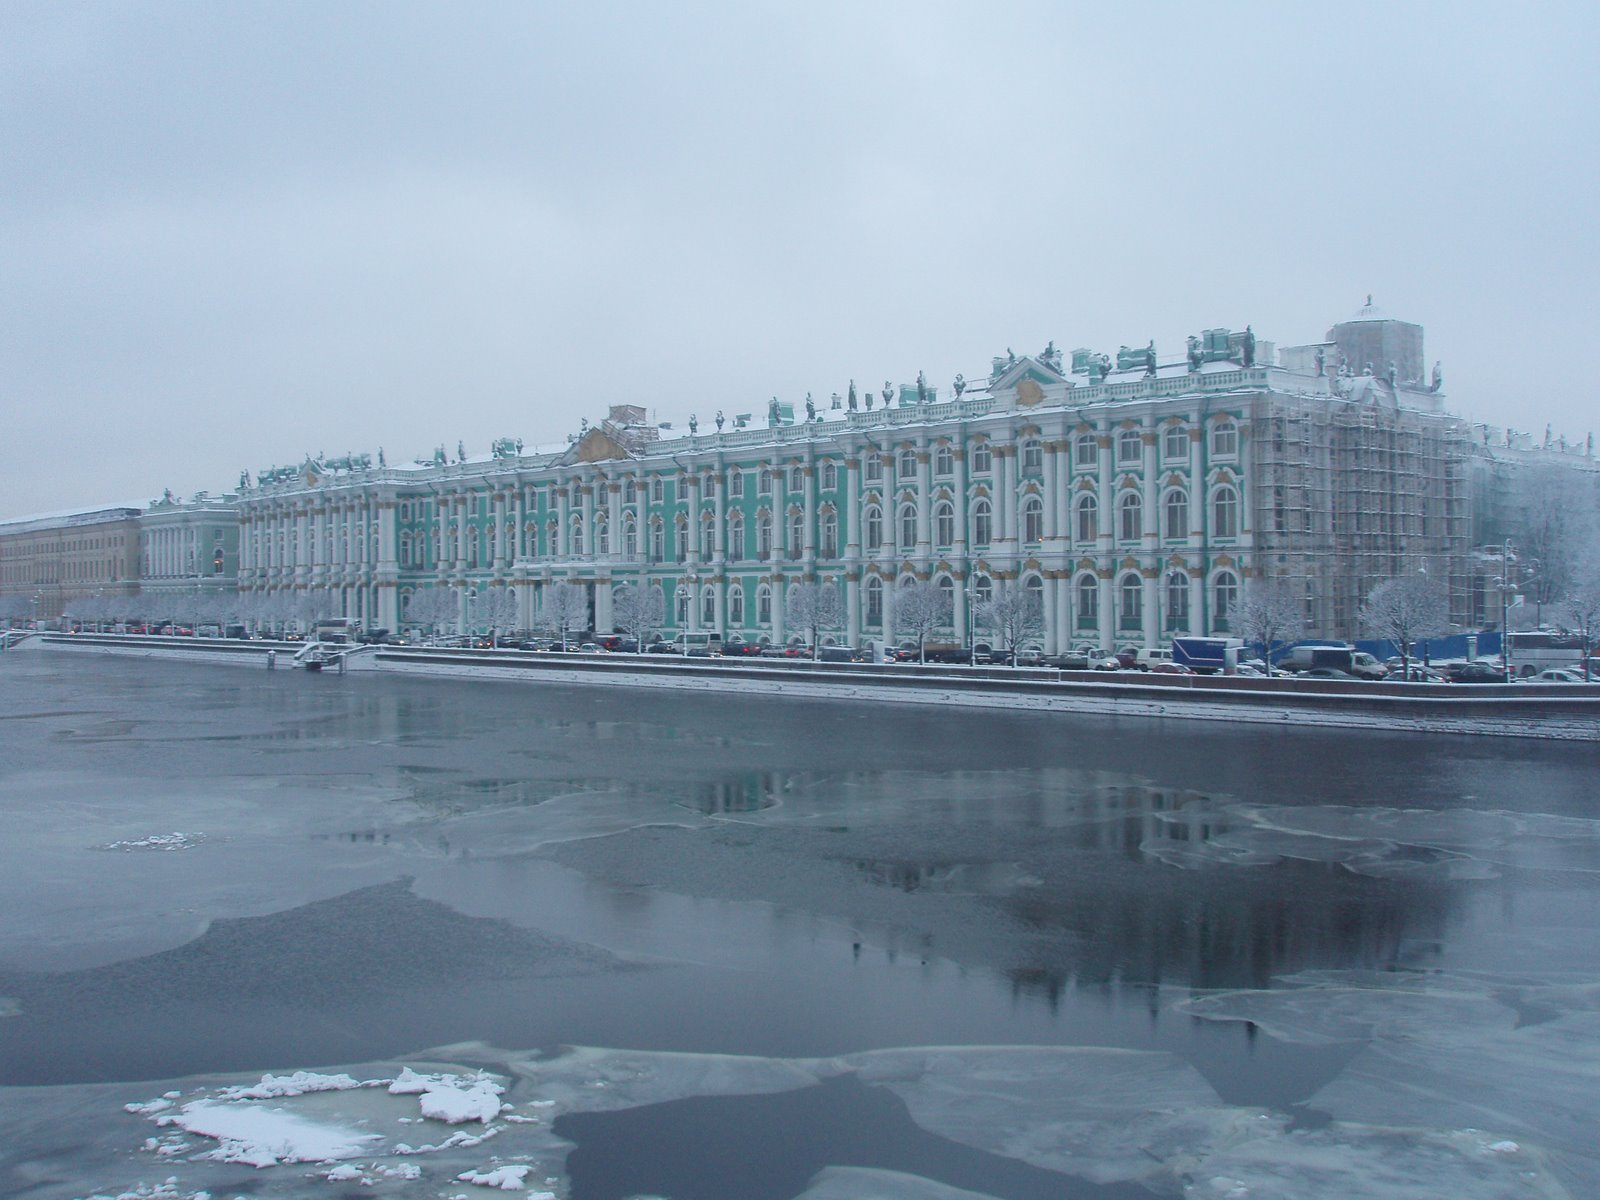 [Snow+in+Russia,+Neva+River+ice+and+Hermitage+01.JPG]